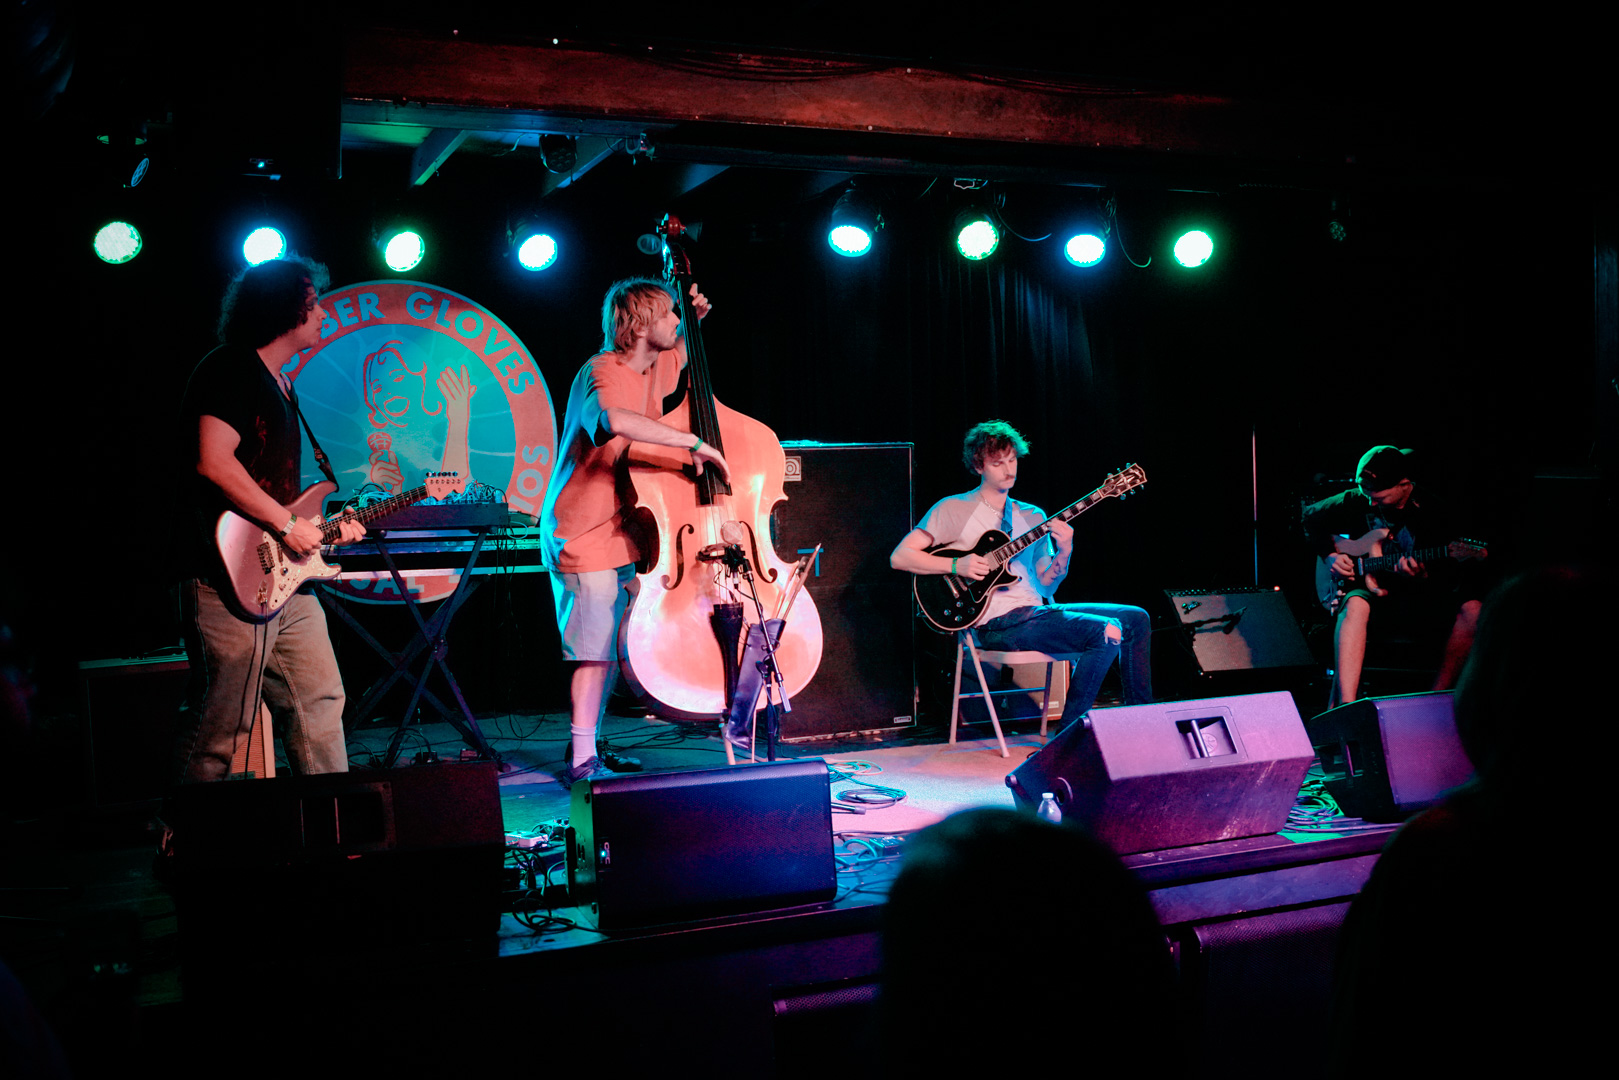 Three guitarists and an upright bass player on stage